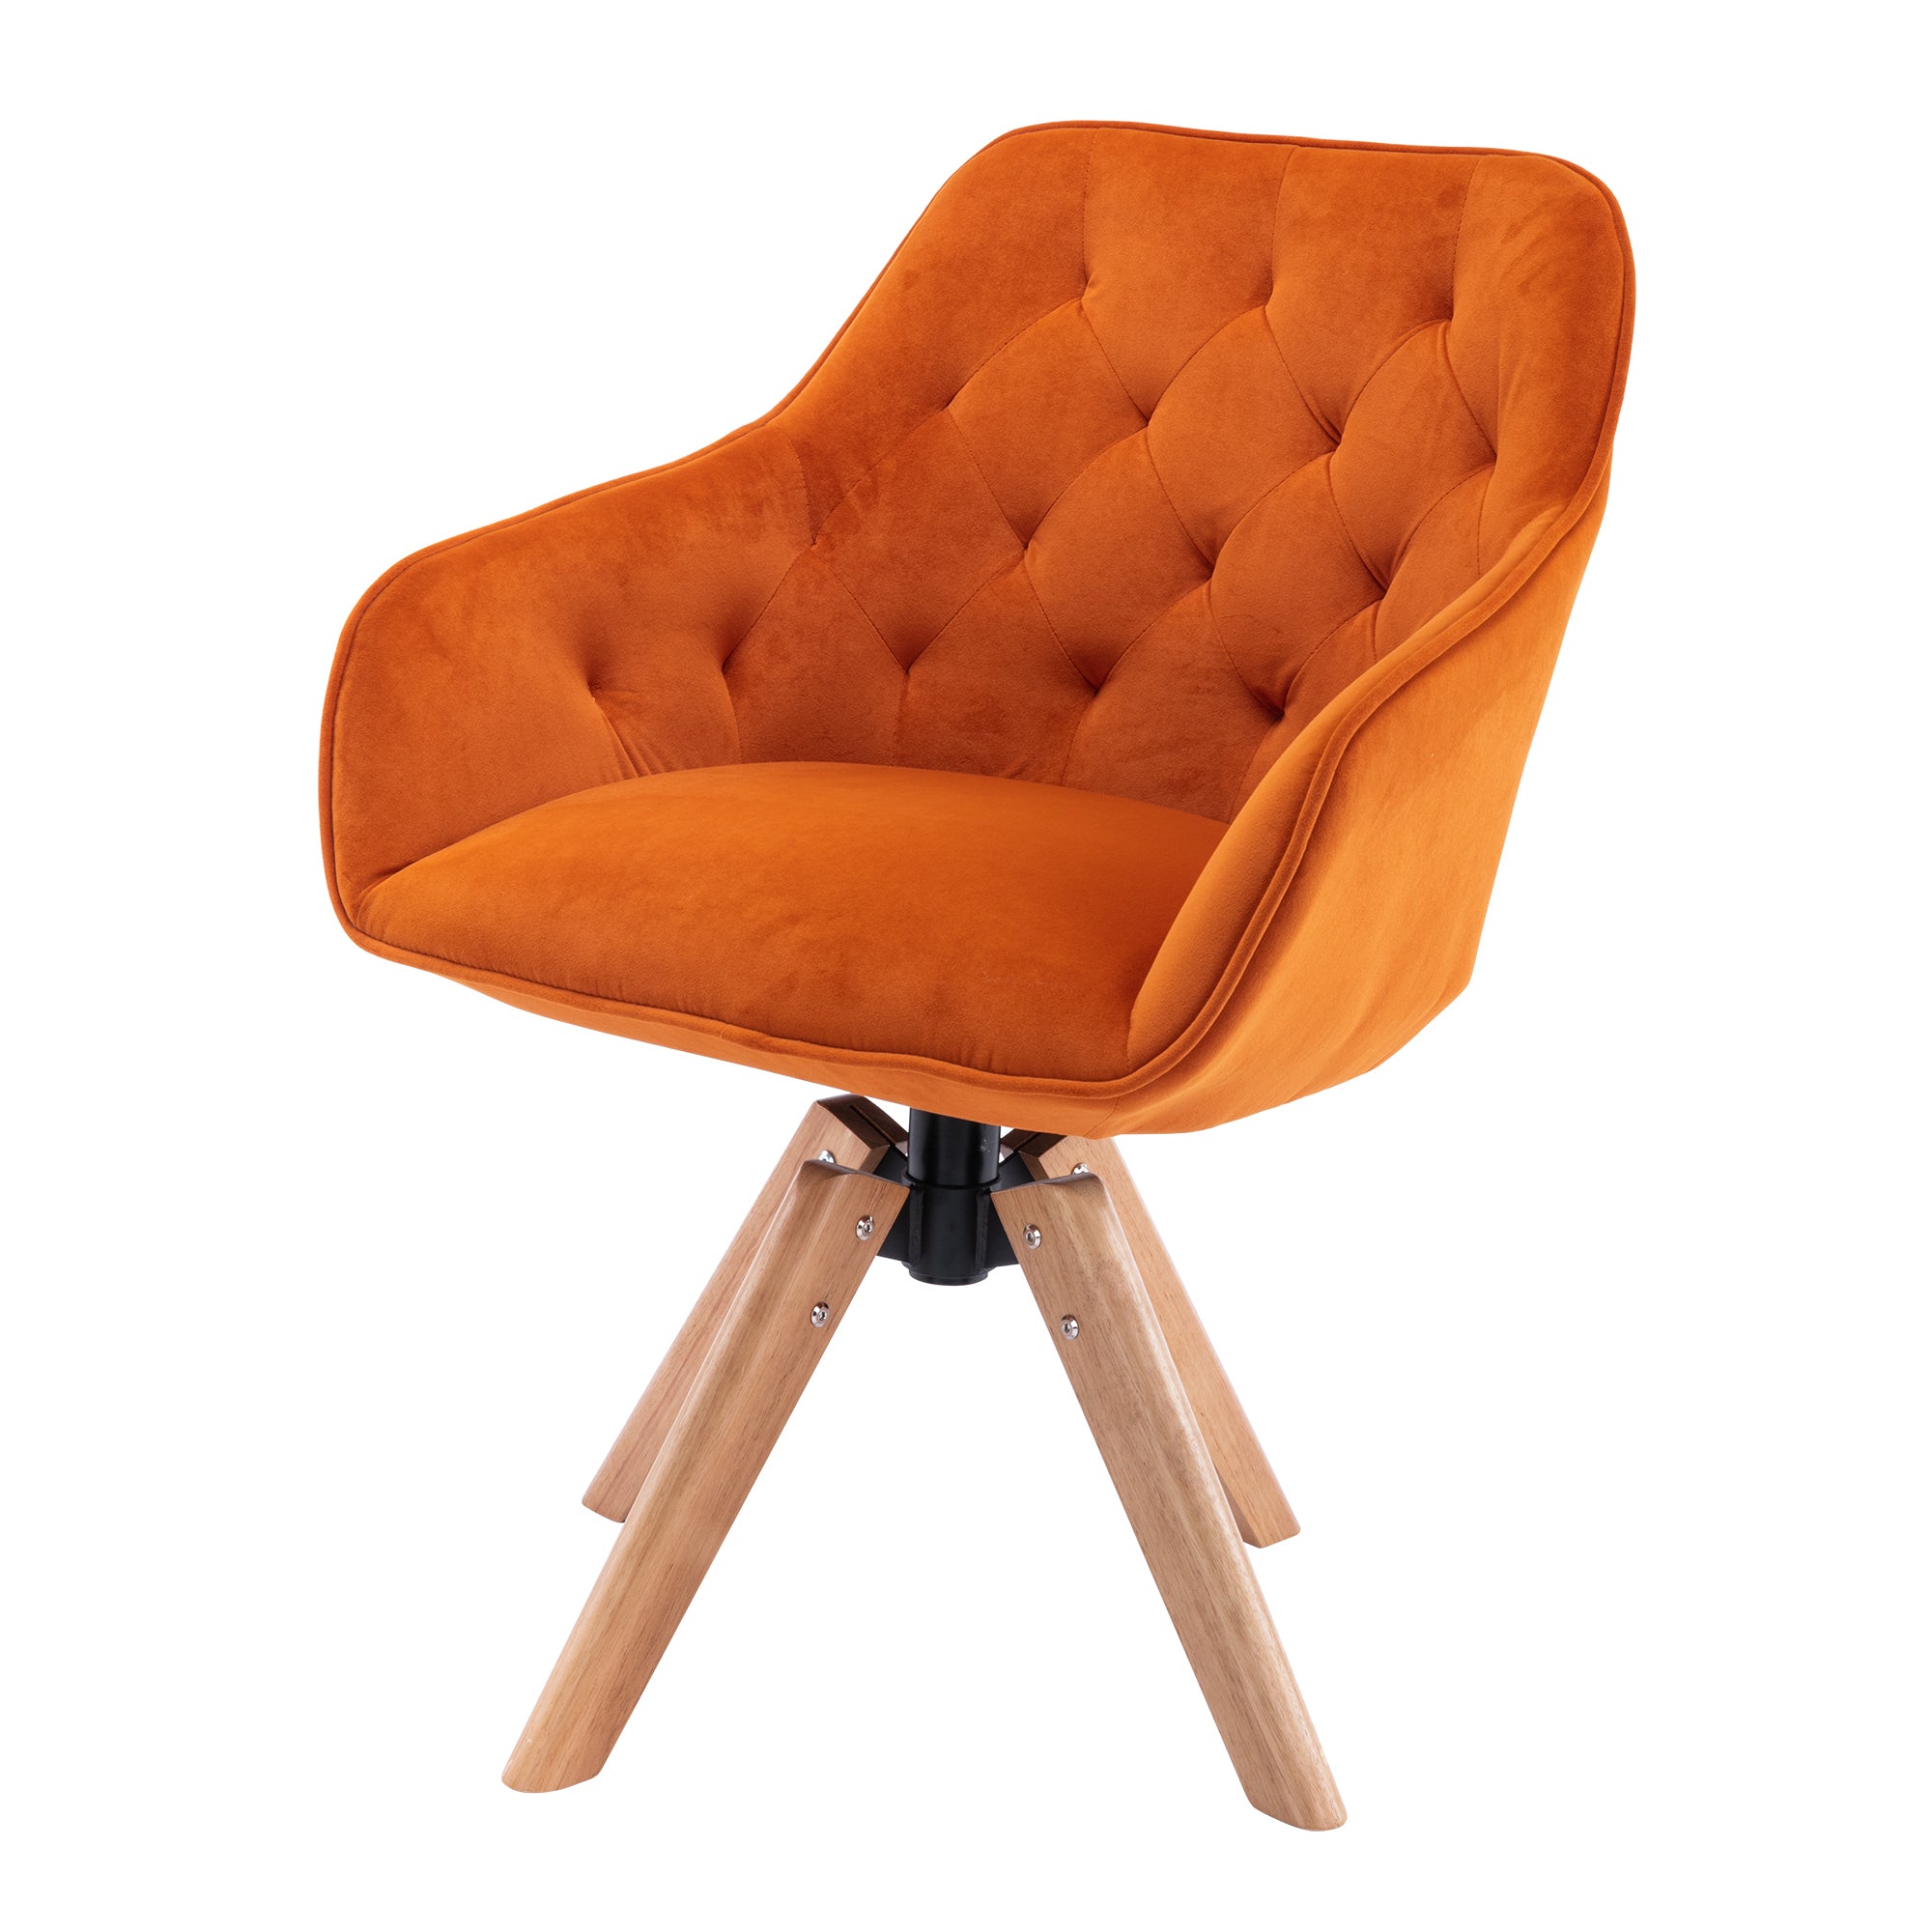 COOLMORE Solid Wood Tufted Upholstered Office Chair(Orange)